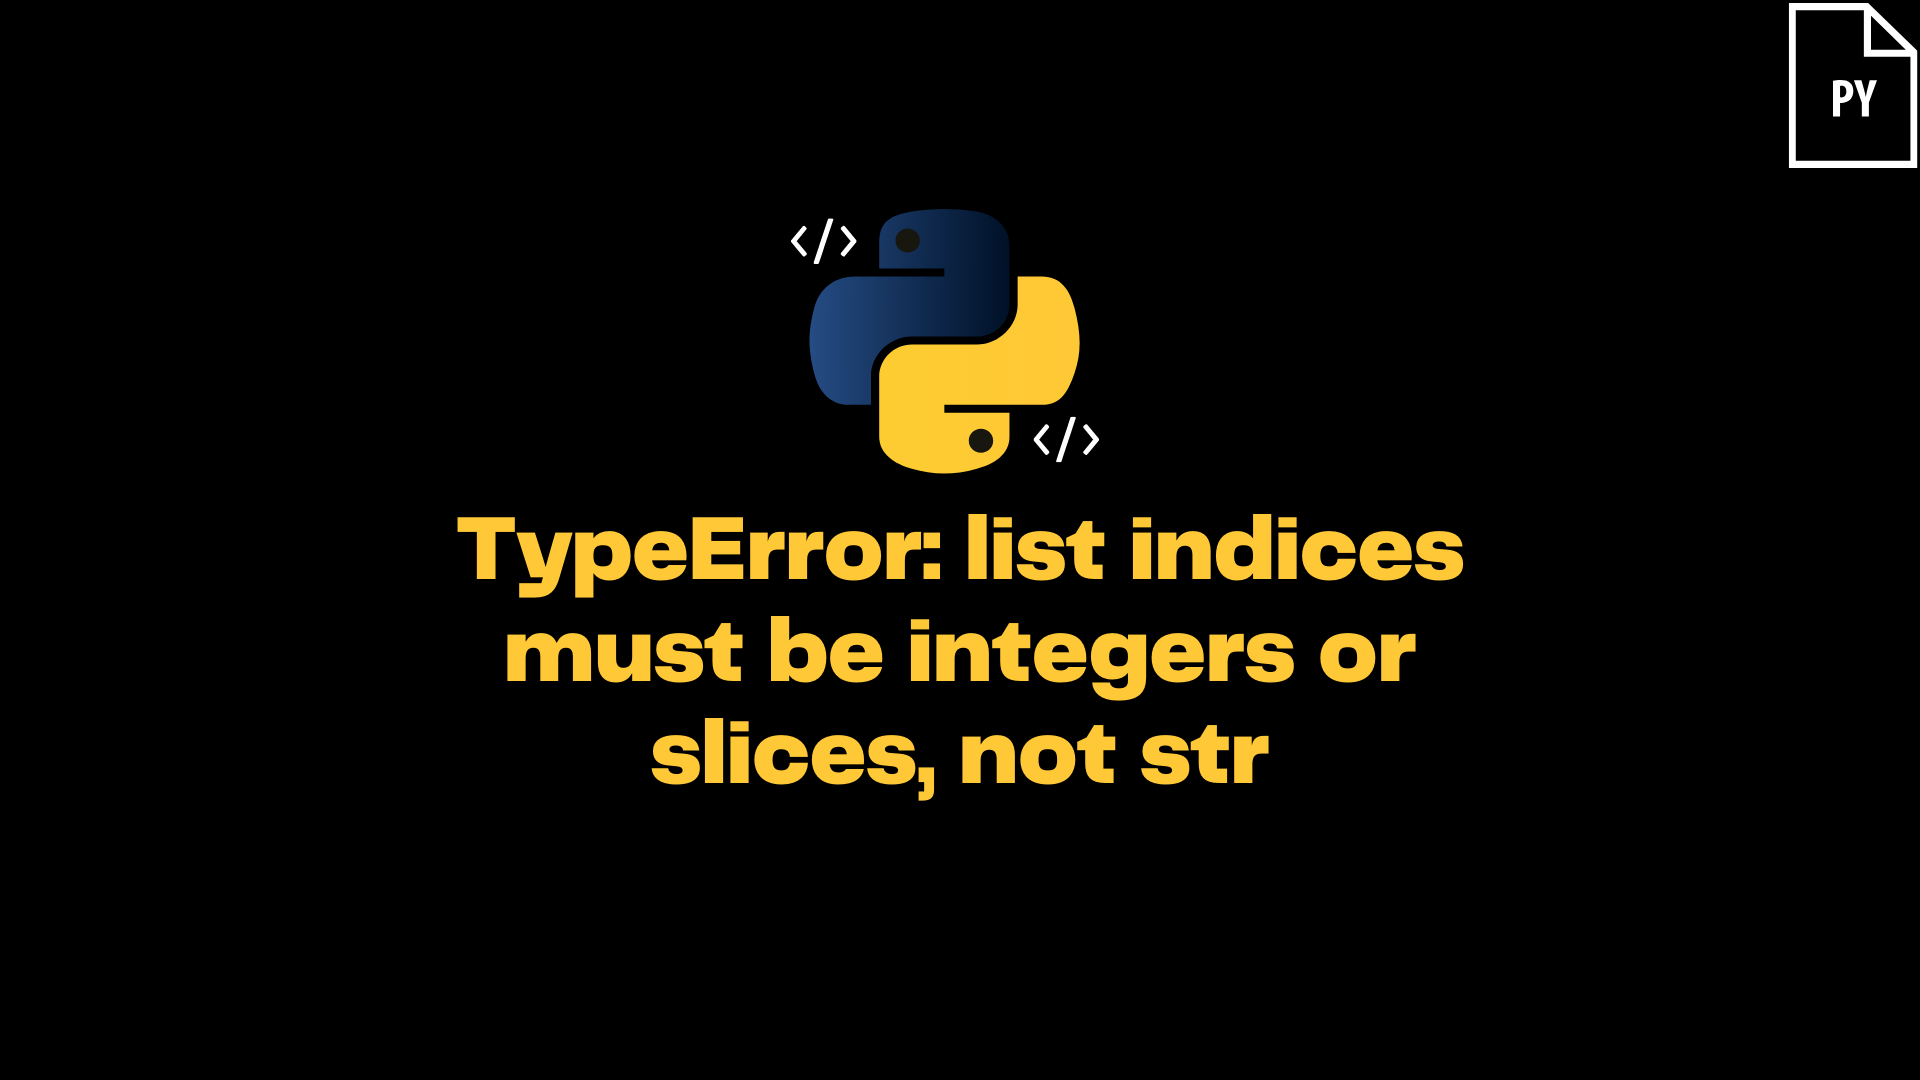 ItsMyCode: TypeError: list indices must be integers or slices, not str